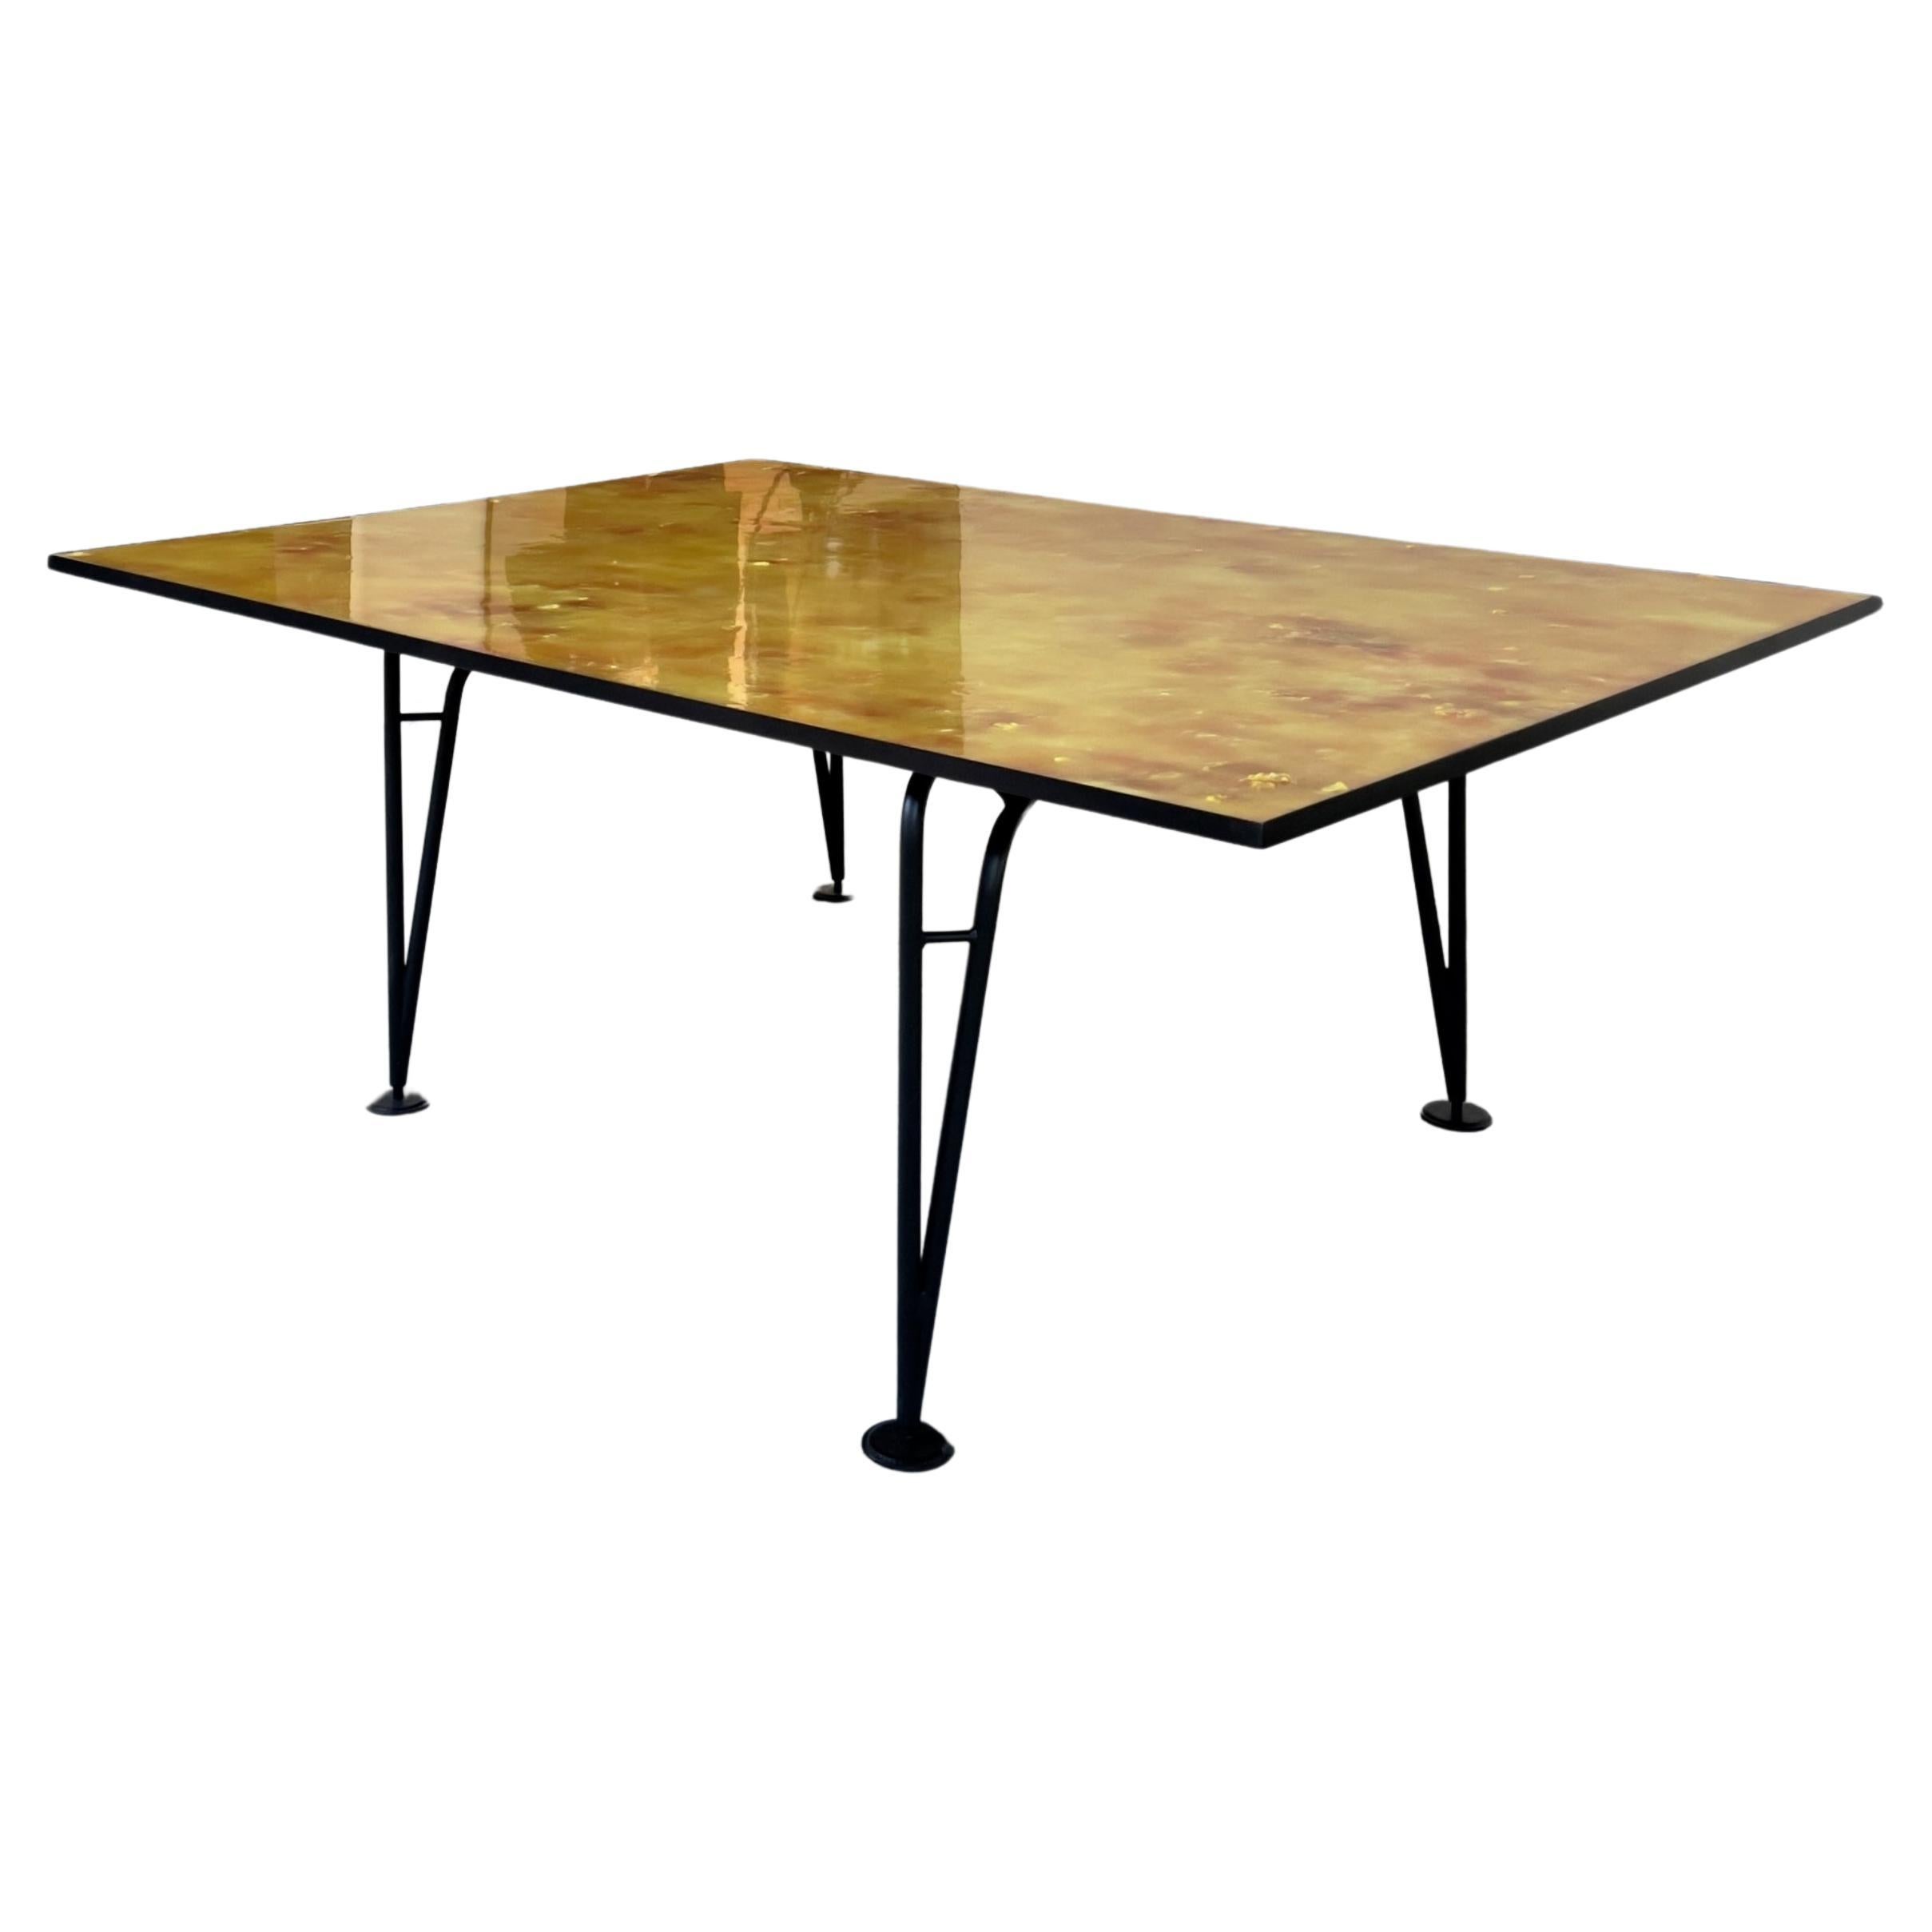 Asymmetrical - Collectible Design Table with Metal Legs and Resin Yellow Top For Sale